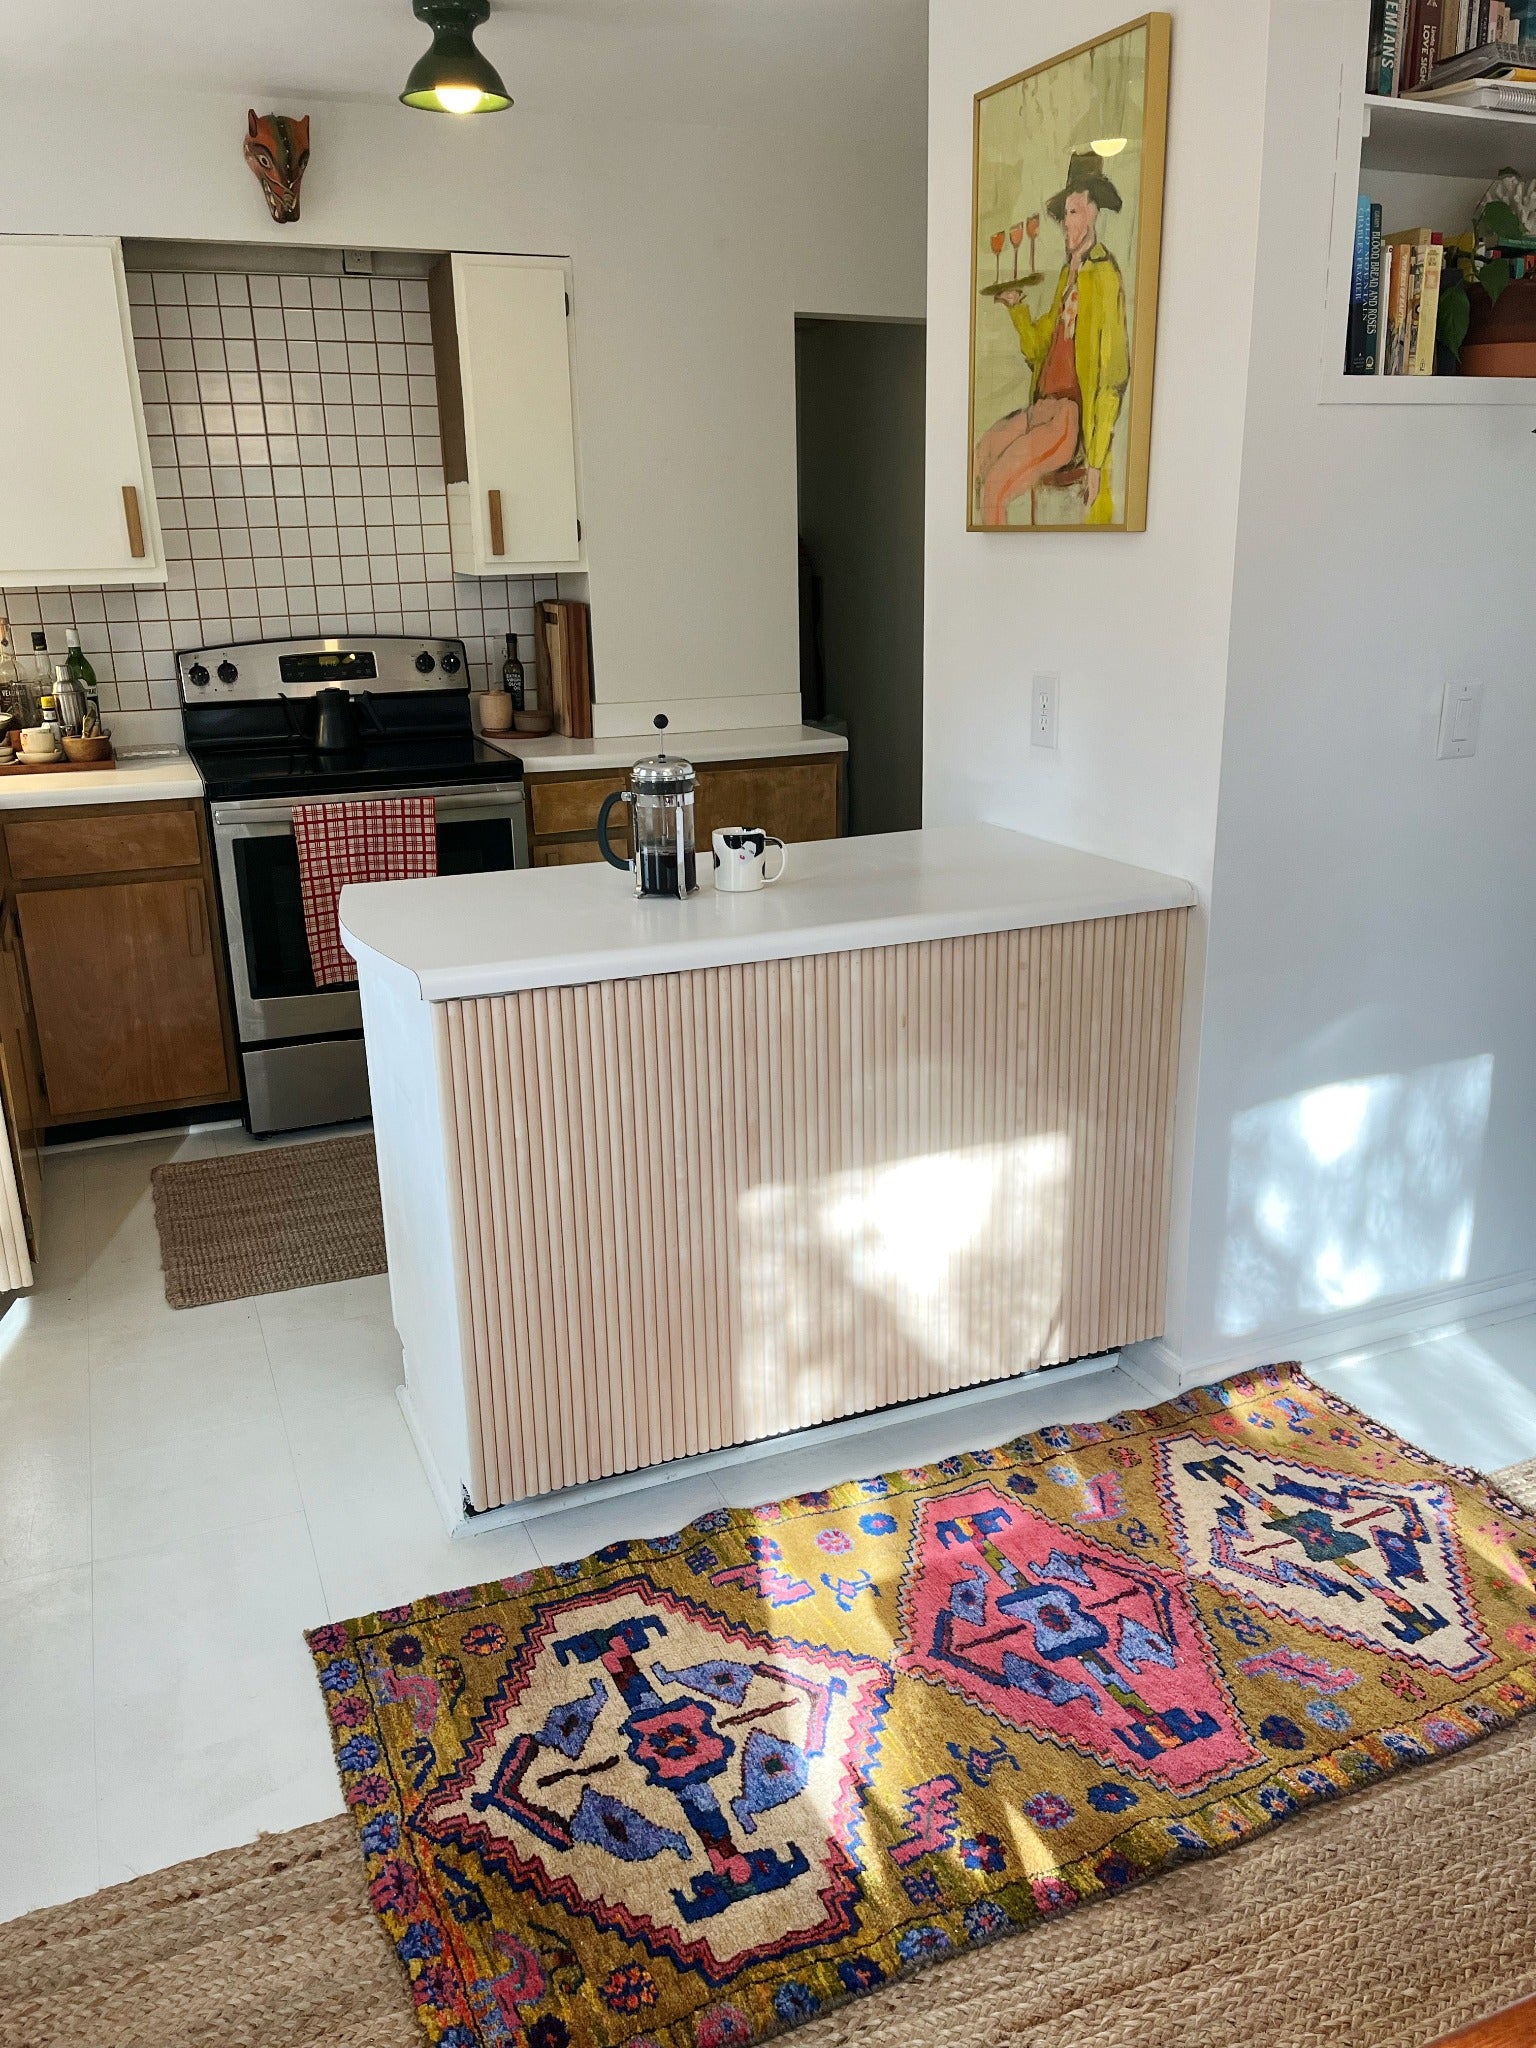 Style Lima Persian Rug in a Kitchen